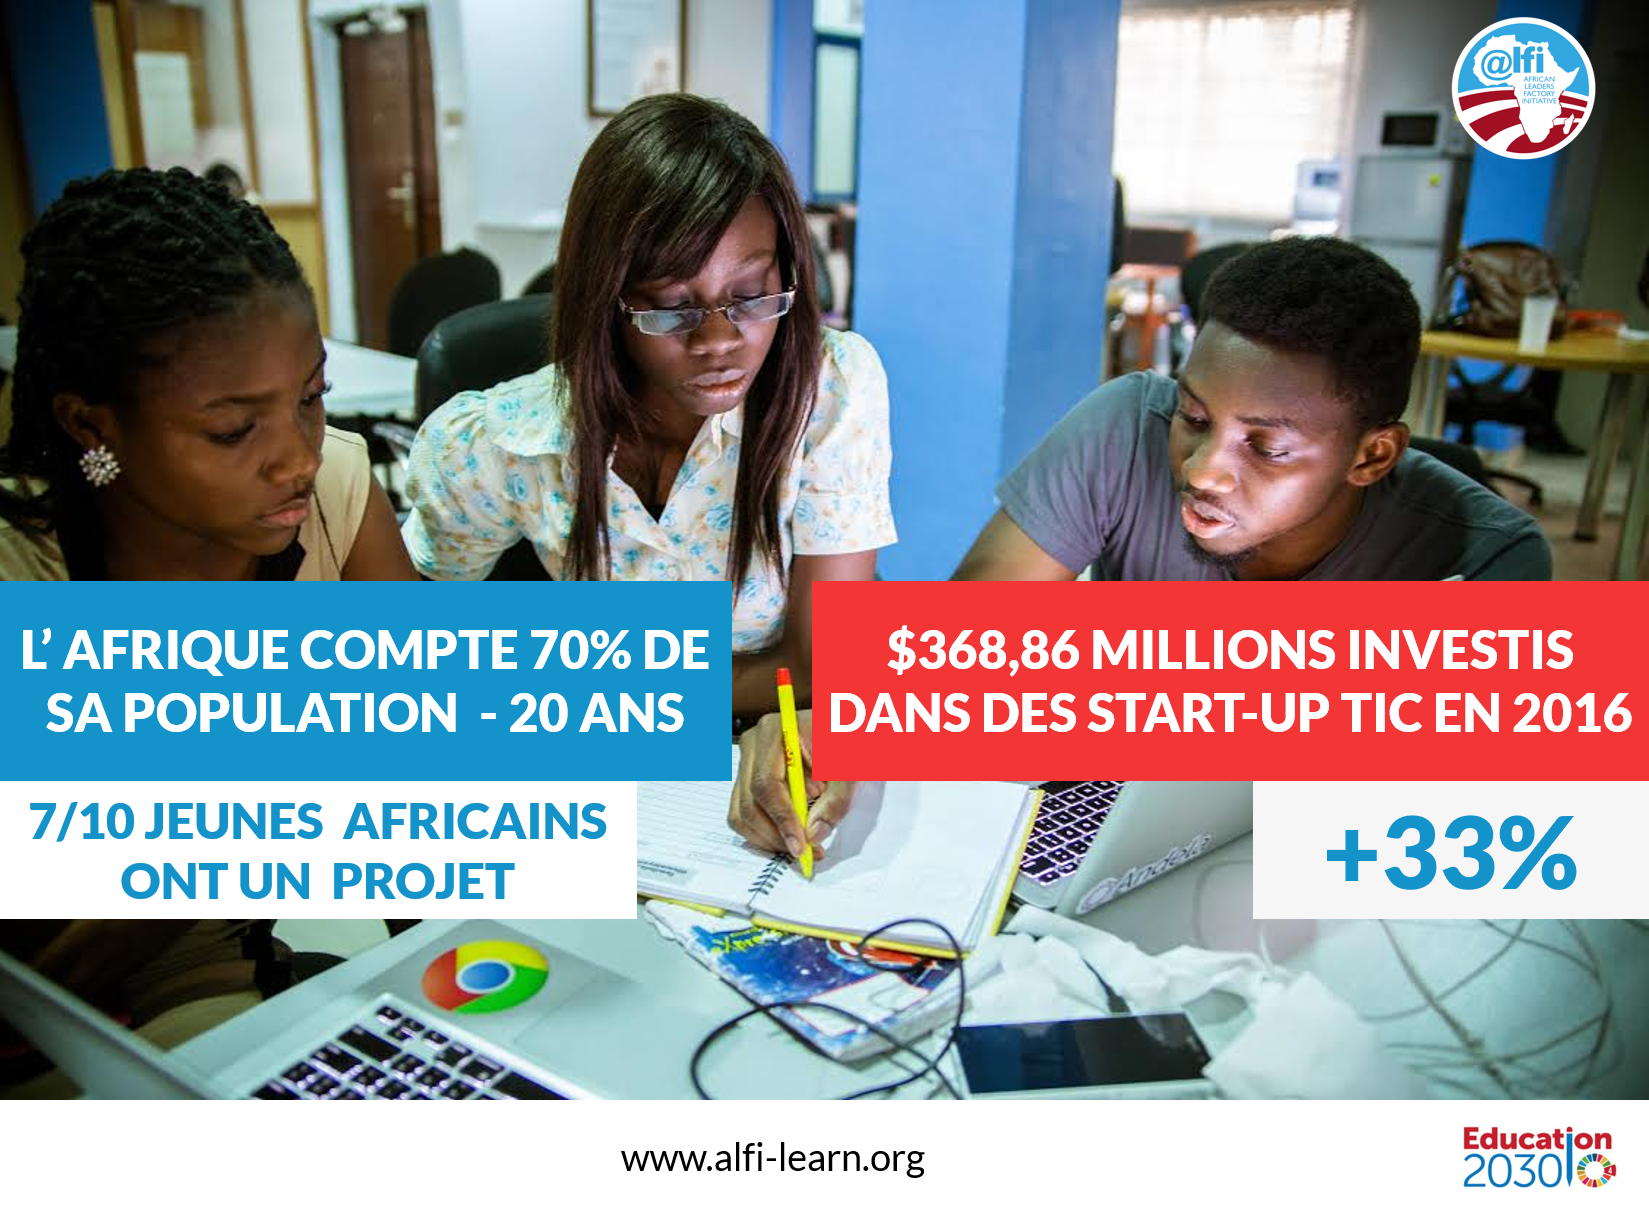 The boom of African start-ups